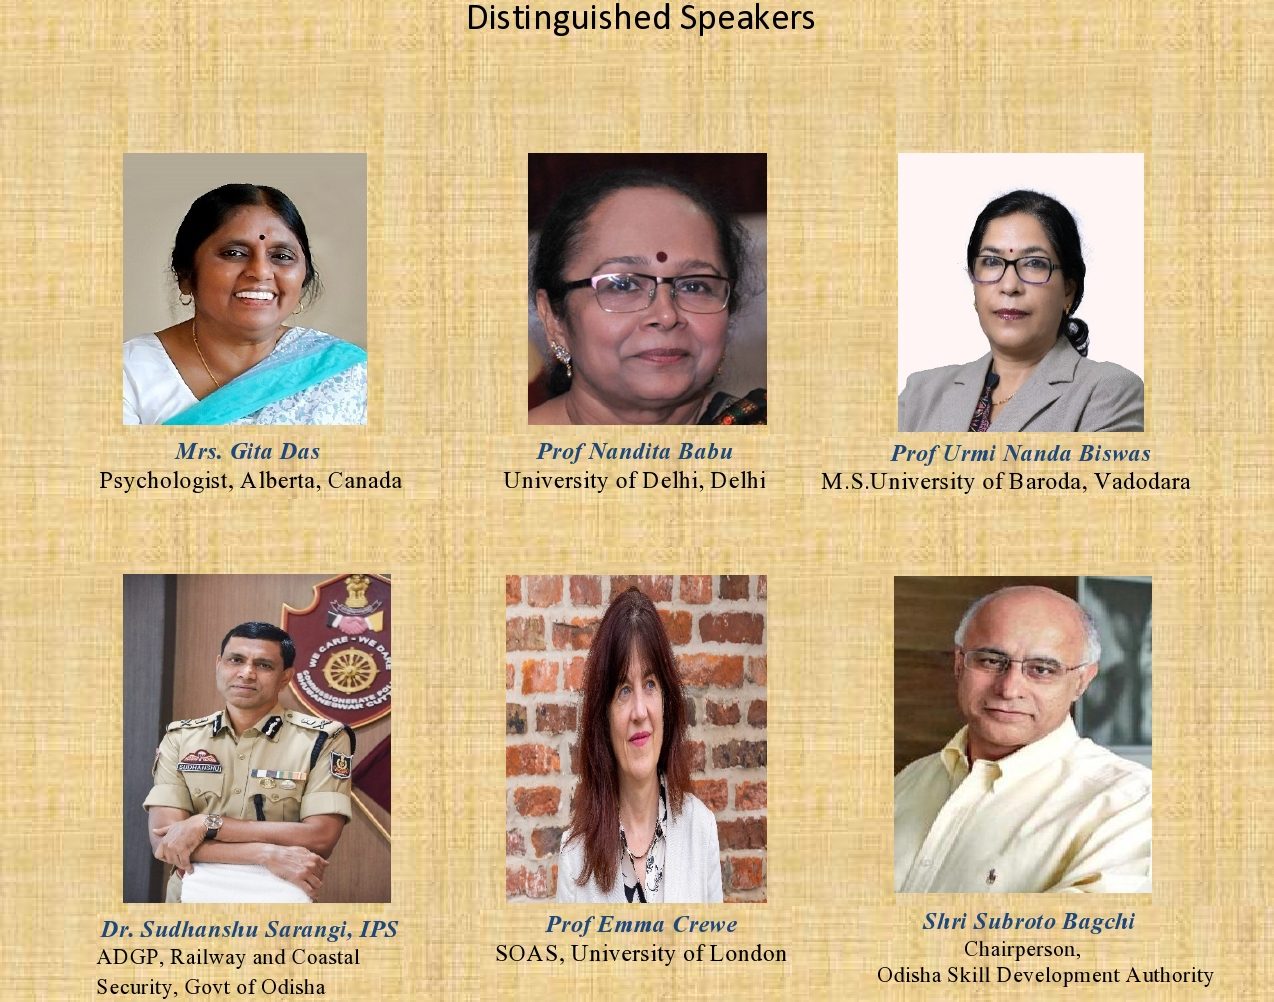 Distinguished Speakers: Intl Conference on Human Dignity and Mental Health in the New Normal, 17-18 December, 2021